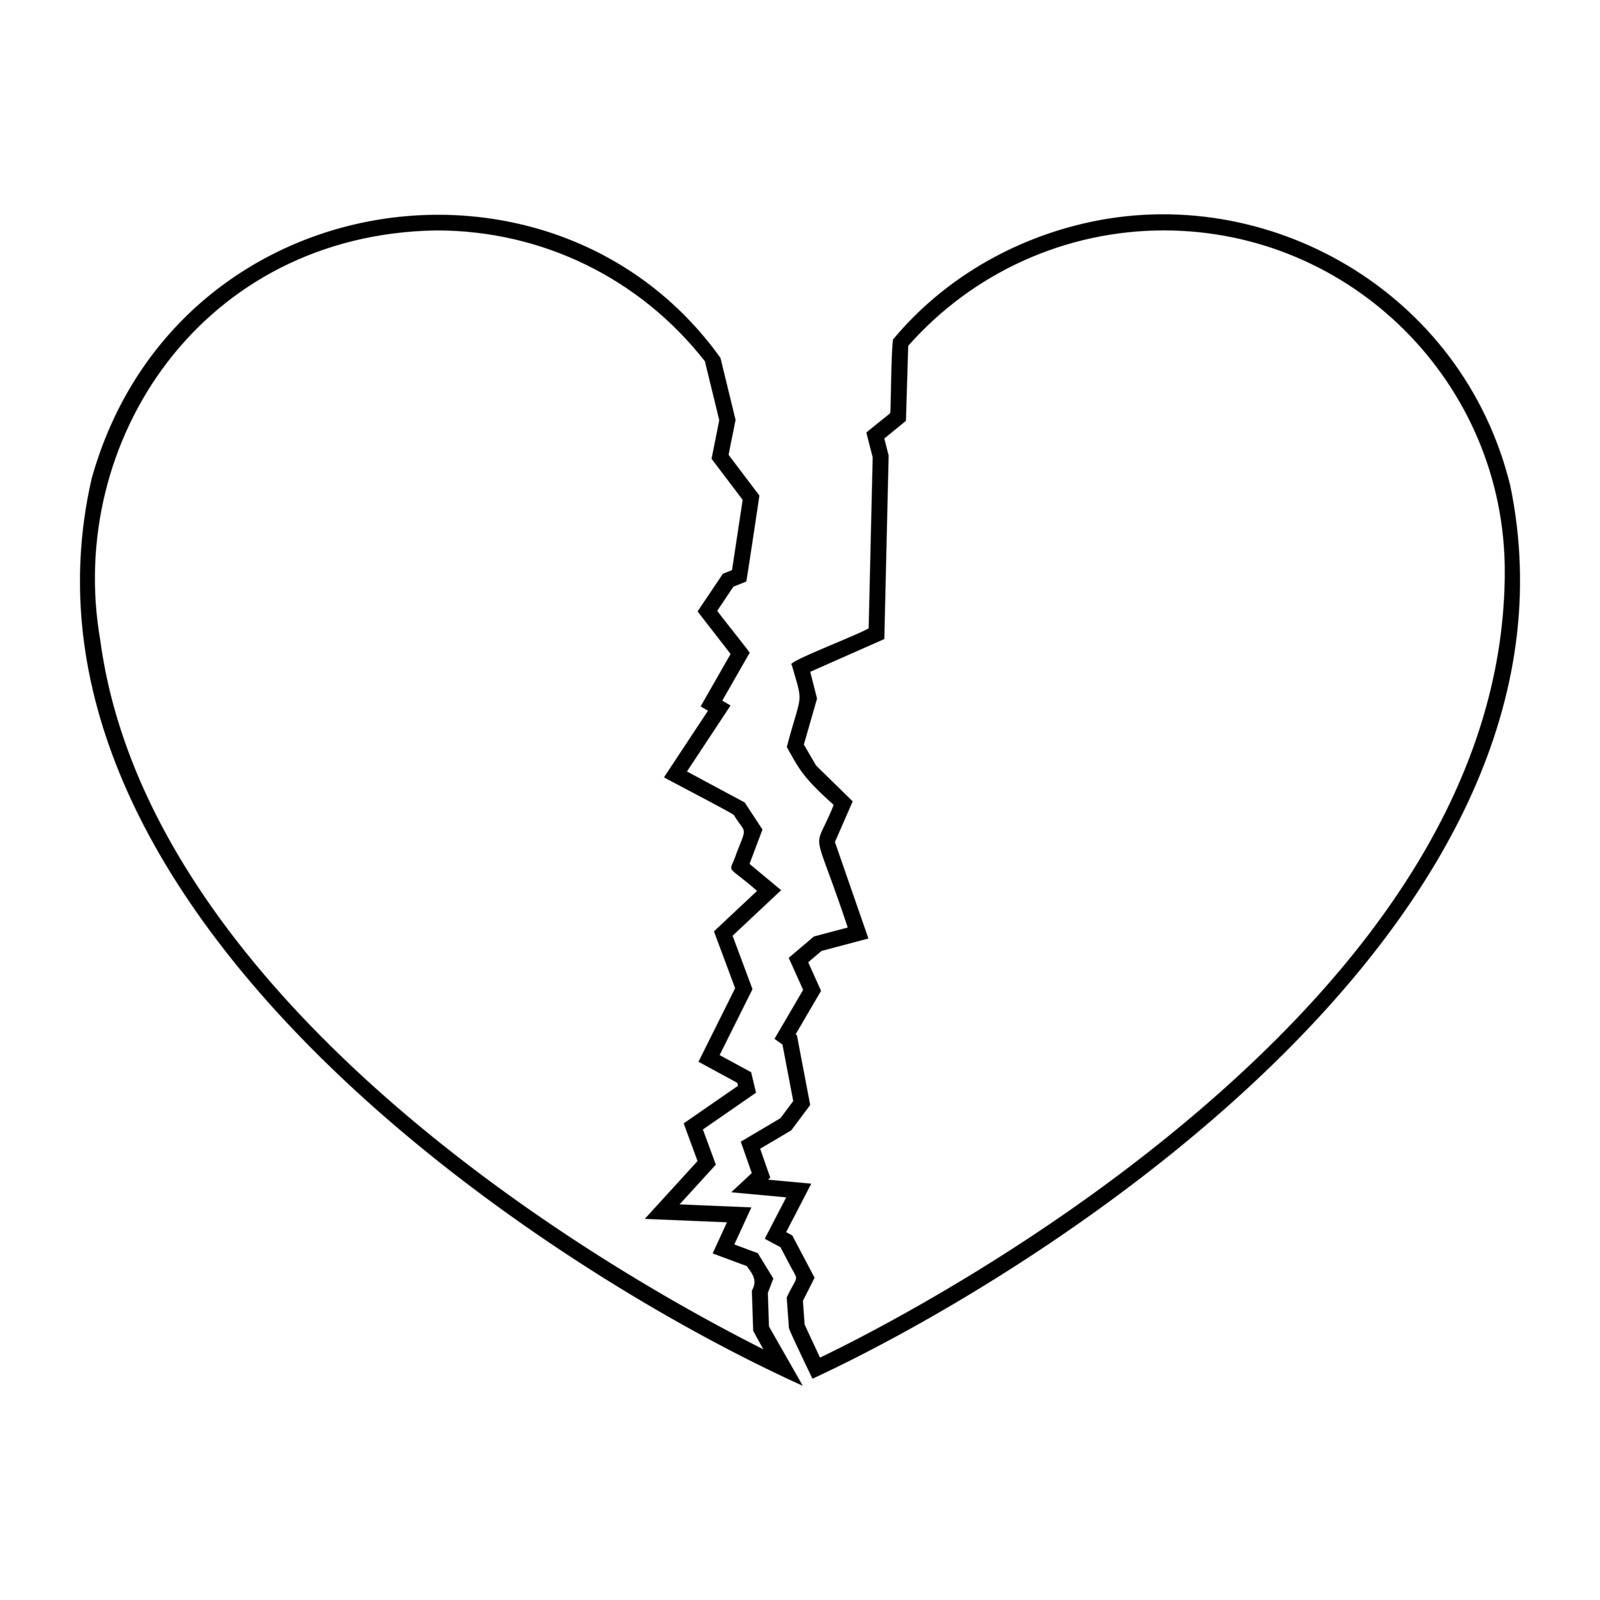 Broken heart icon outline black color vector illustration flat style simple image